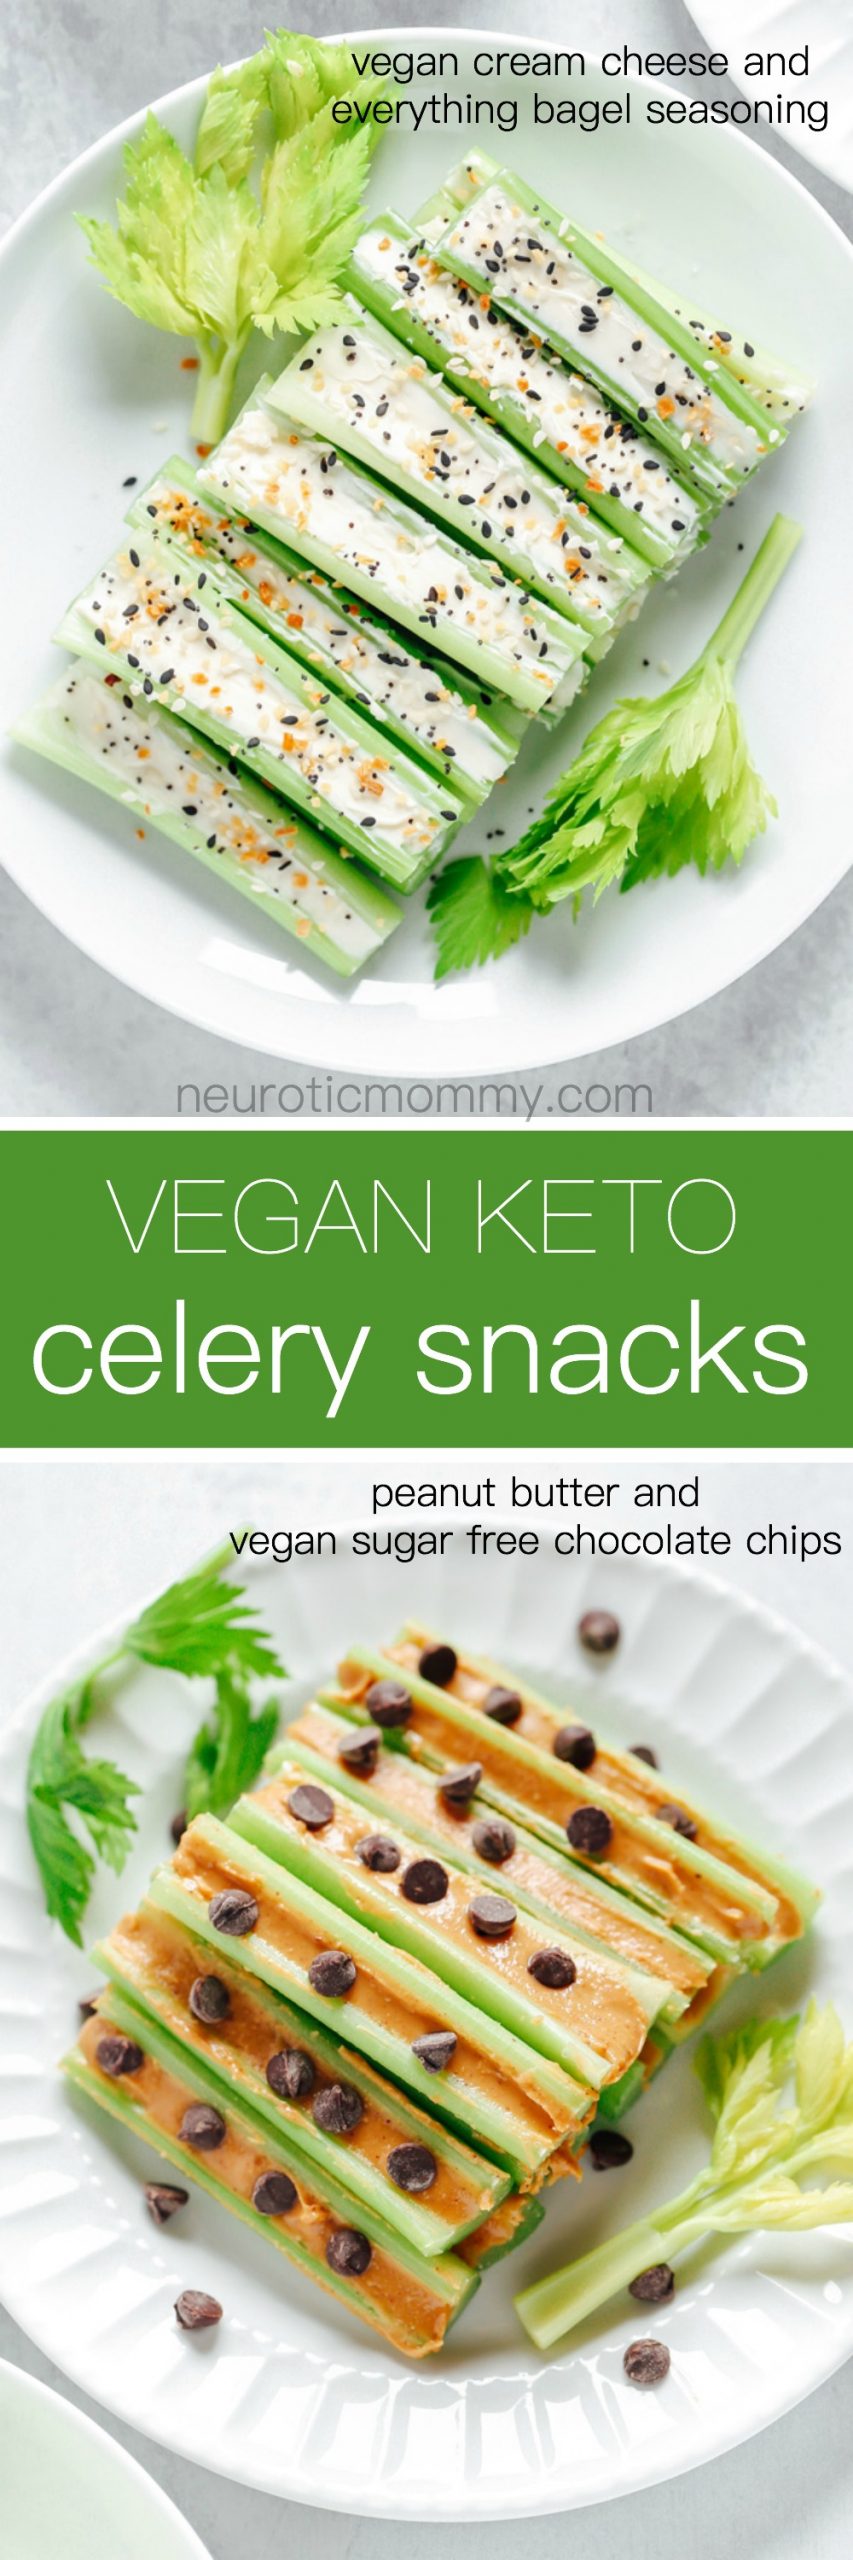 Vegan Keto Celery Snacks - For the carb conscious, filled with creamy goodness through every bite making this a snack to look forward to. NeuroticMommy.com #veganketo 